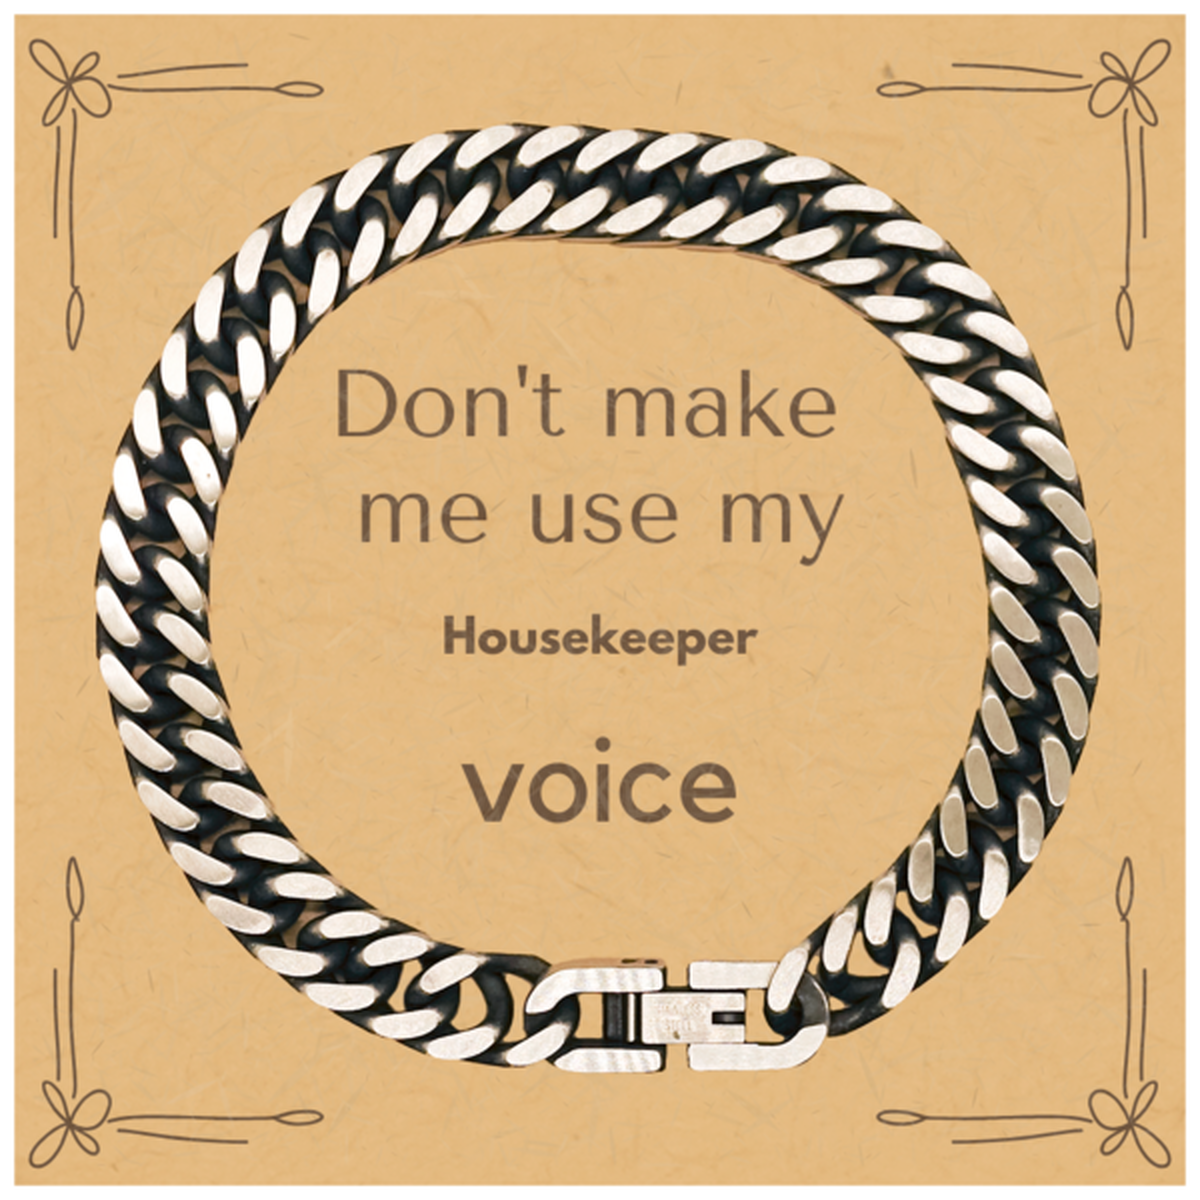 Don't make me use my Housekeeper voice, Sarcasm Housekeeper Card Gifts, Christmas Housekeeper Cuban Link Chain Bracelet Birthday Unique Gifts For Housekeeper Coworkers, Men, Women, Colleague, Friends